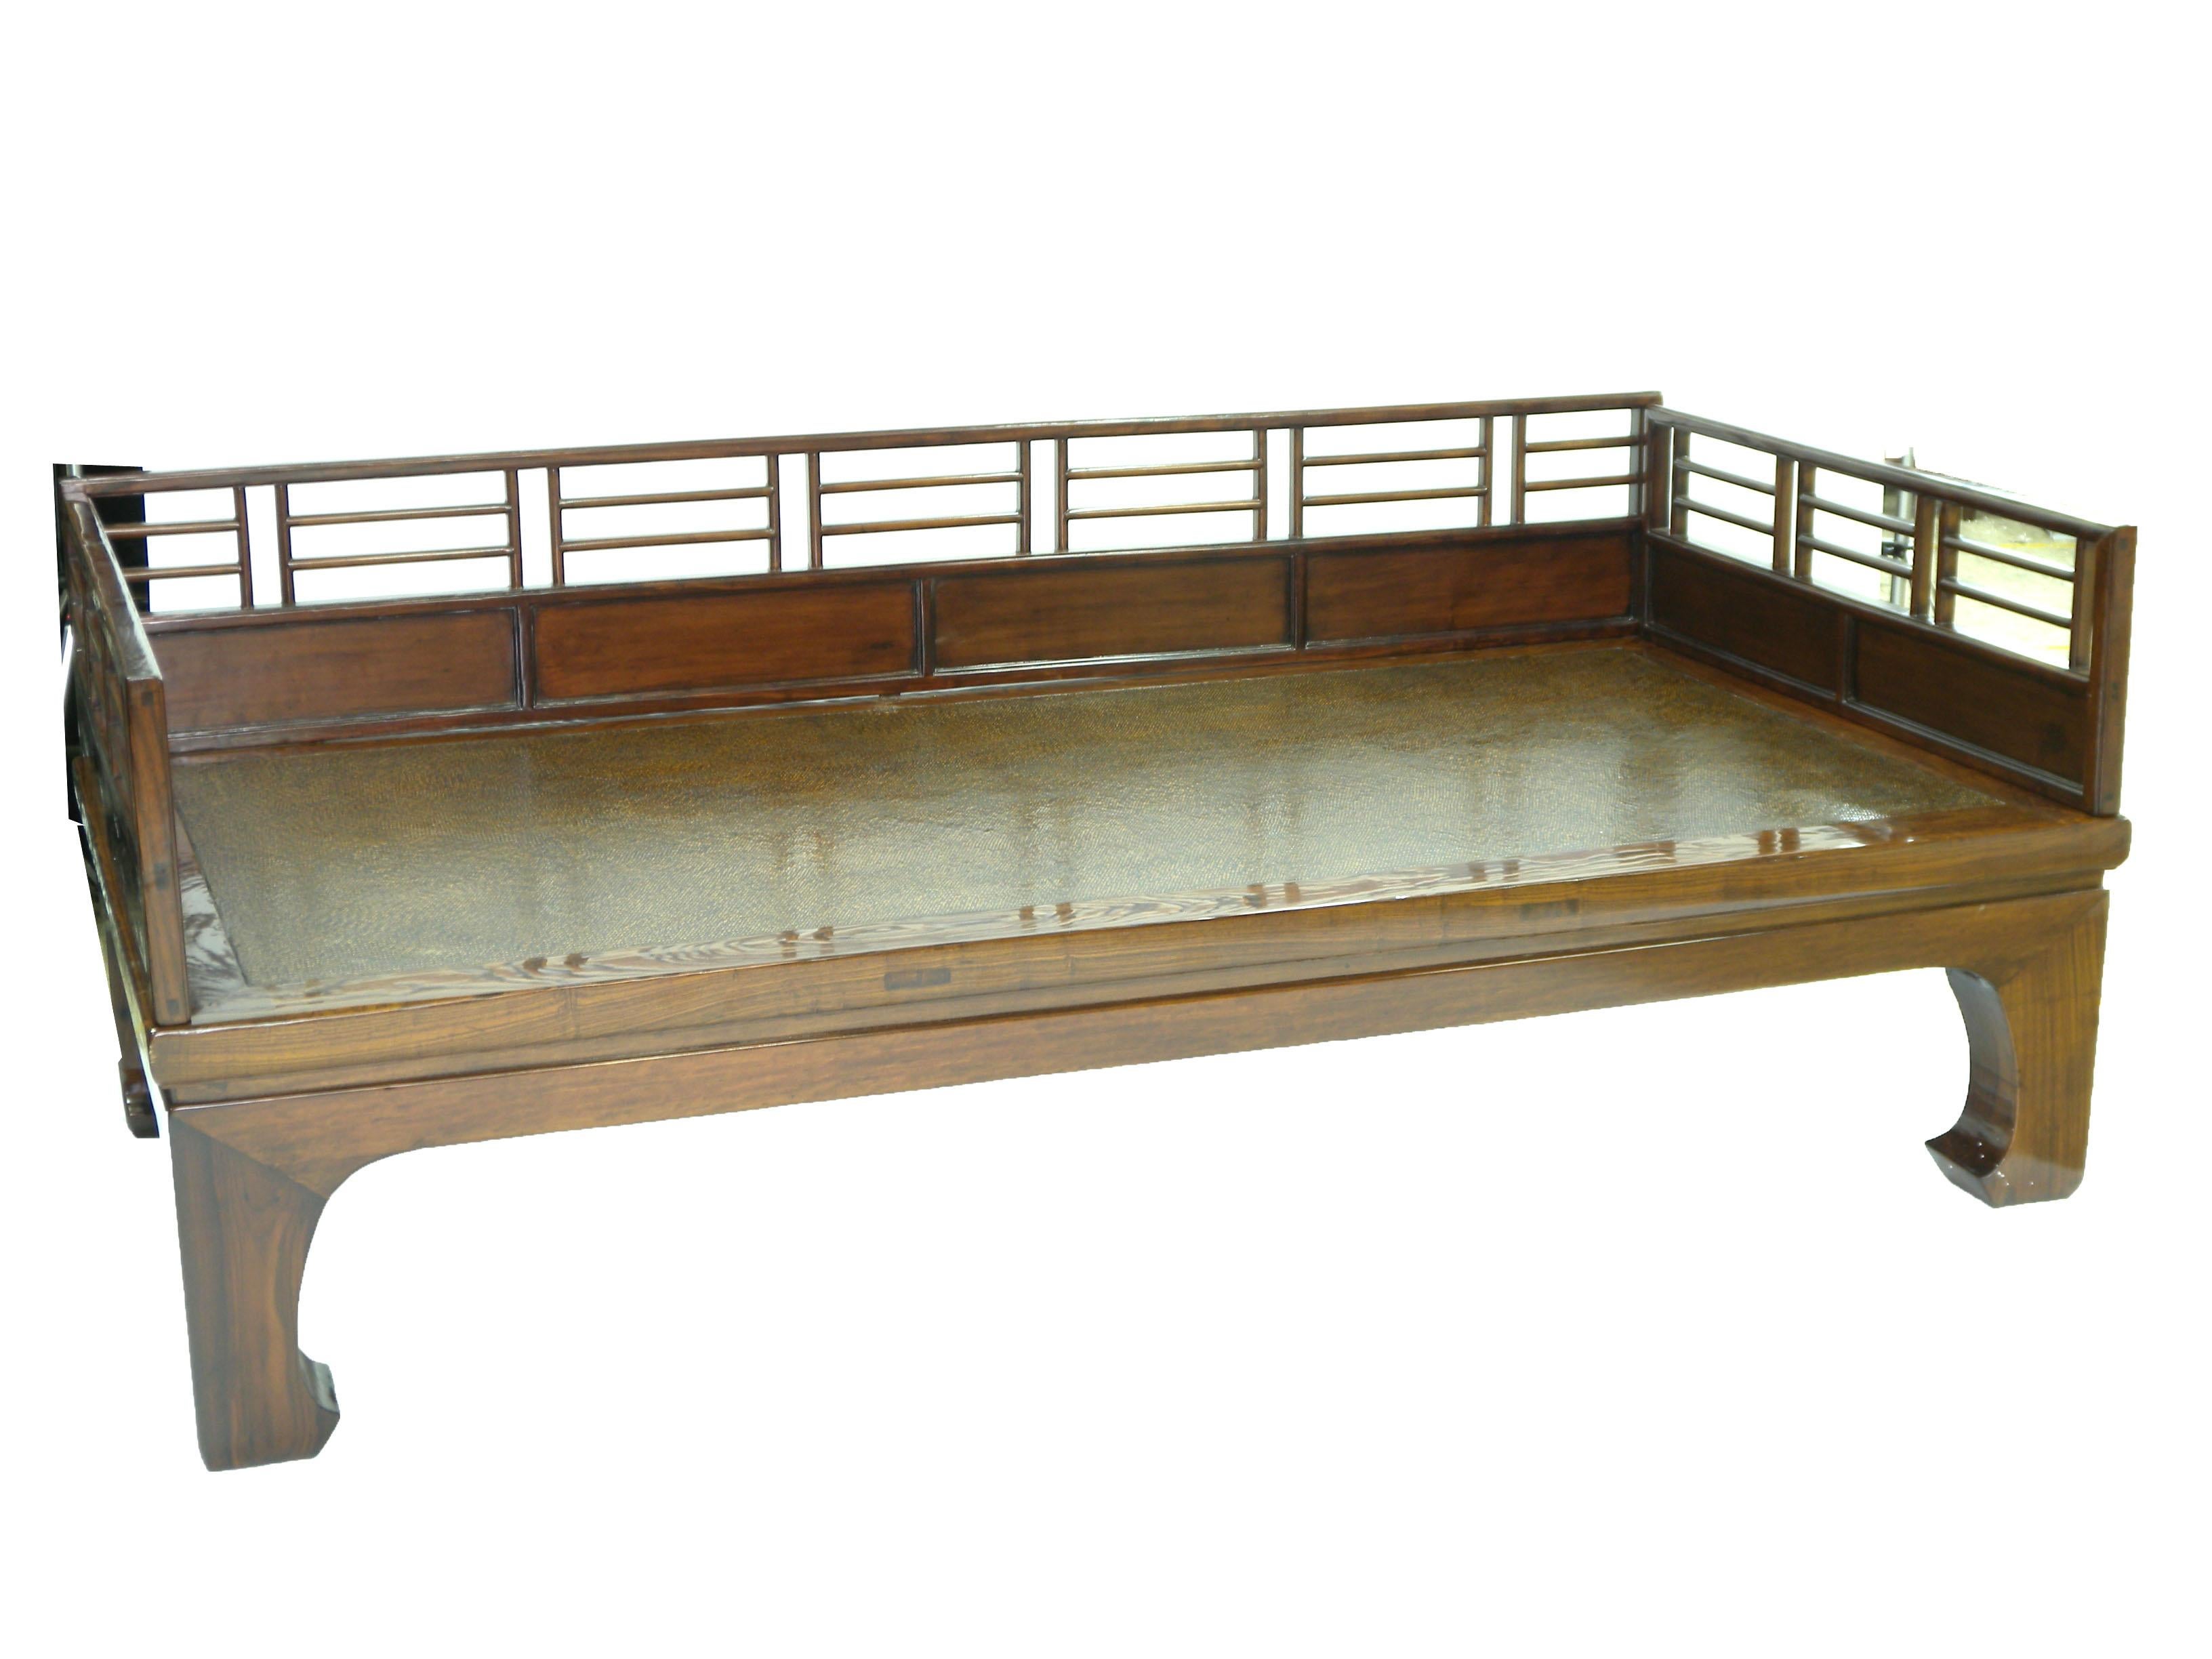 Chinese Antique Louhan Chinoiserie Couch or Day Bed with Fretwork Railings, Ming Style